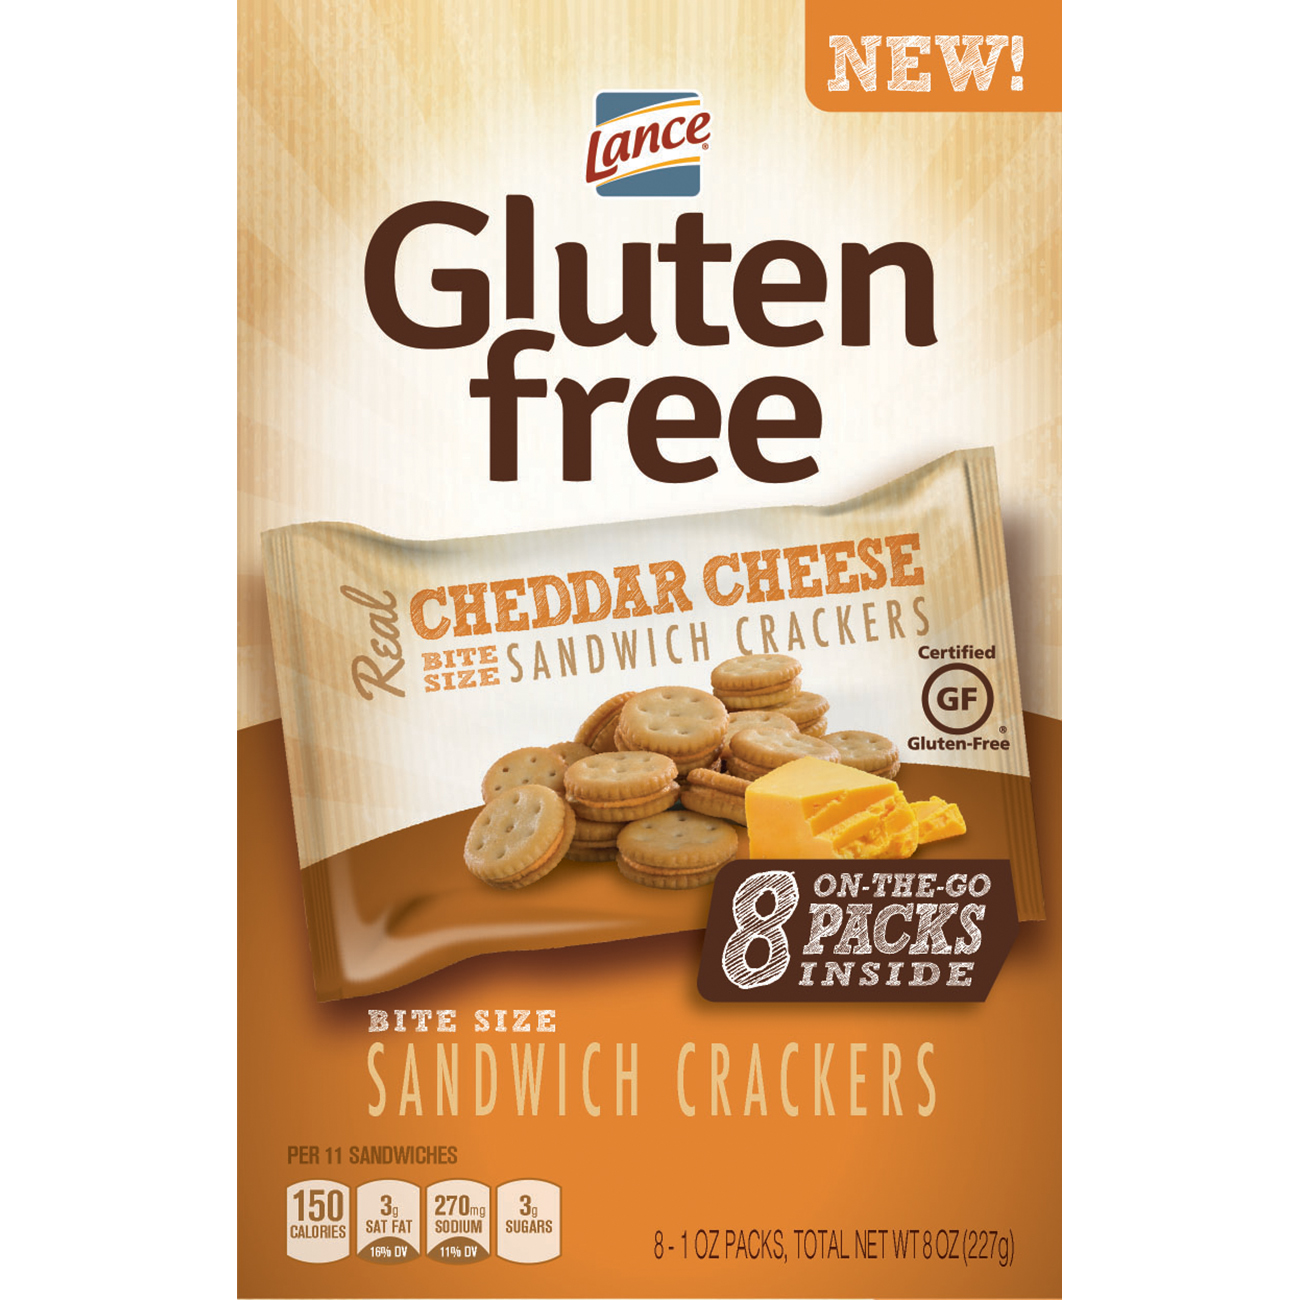 Lance Gluten-Free Bite Size Sandwich Crackers On-The-Go Packs Real Cheddar Cheese - 8 CT